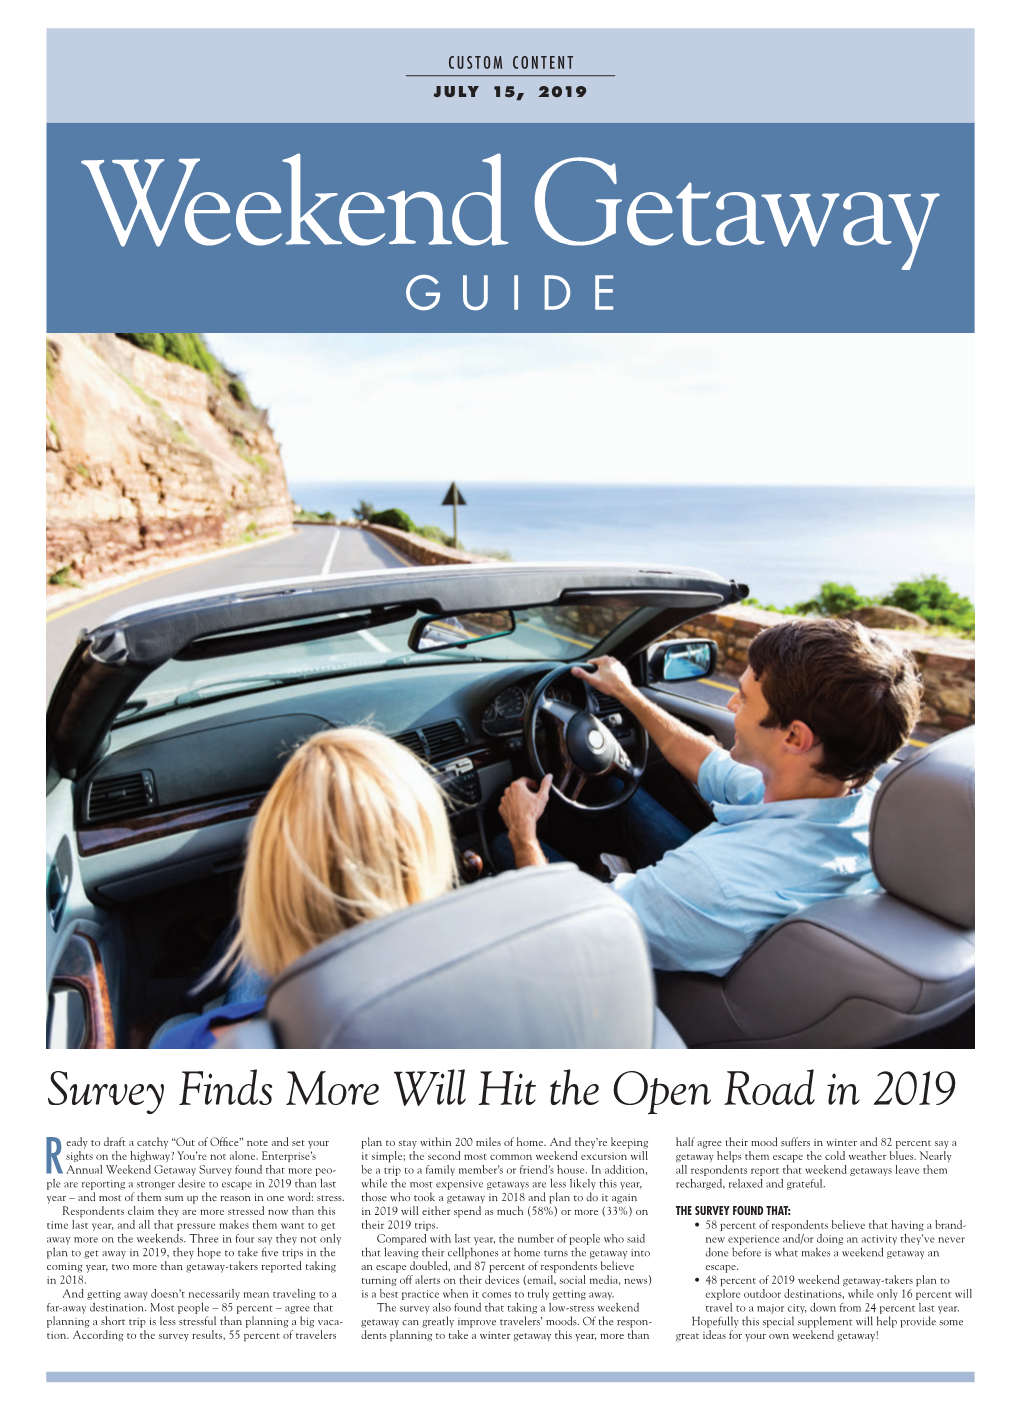 Survey Finds More Will Hit the Open Road in 2019